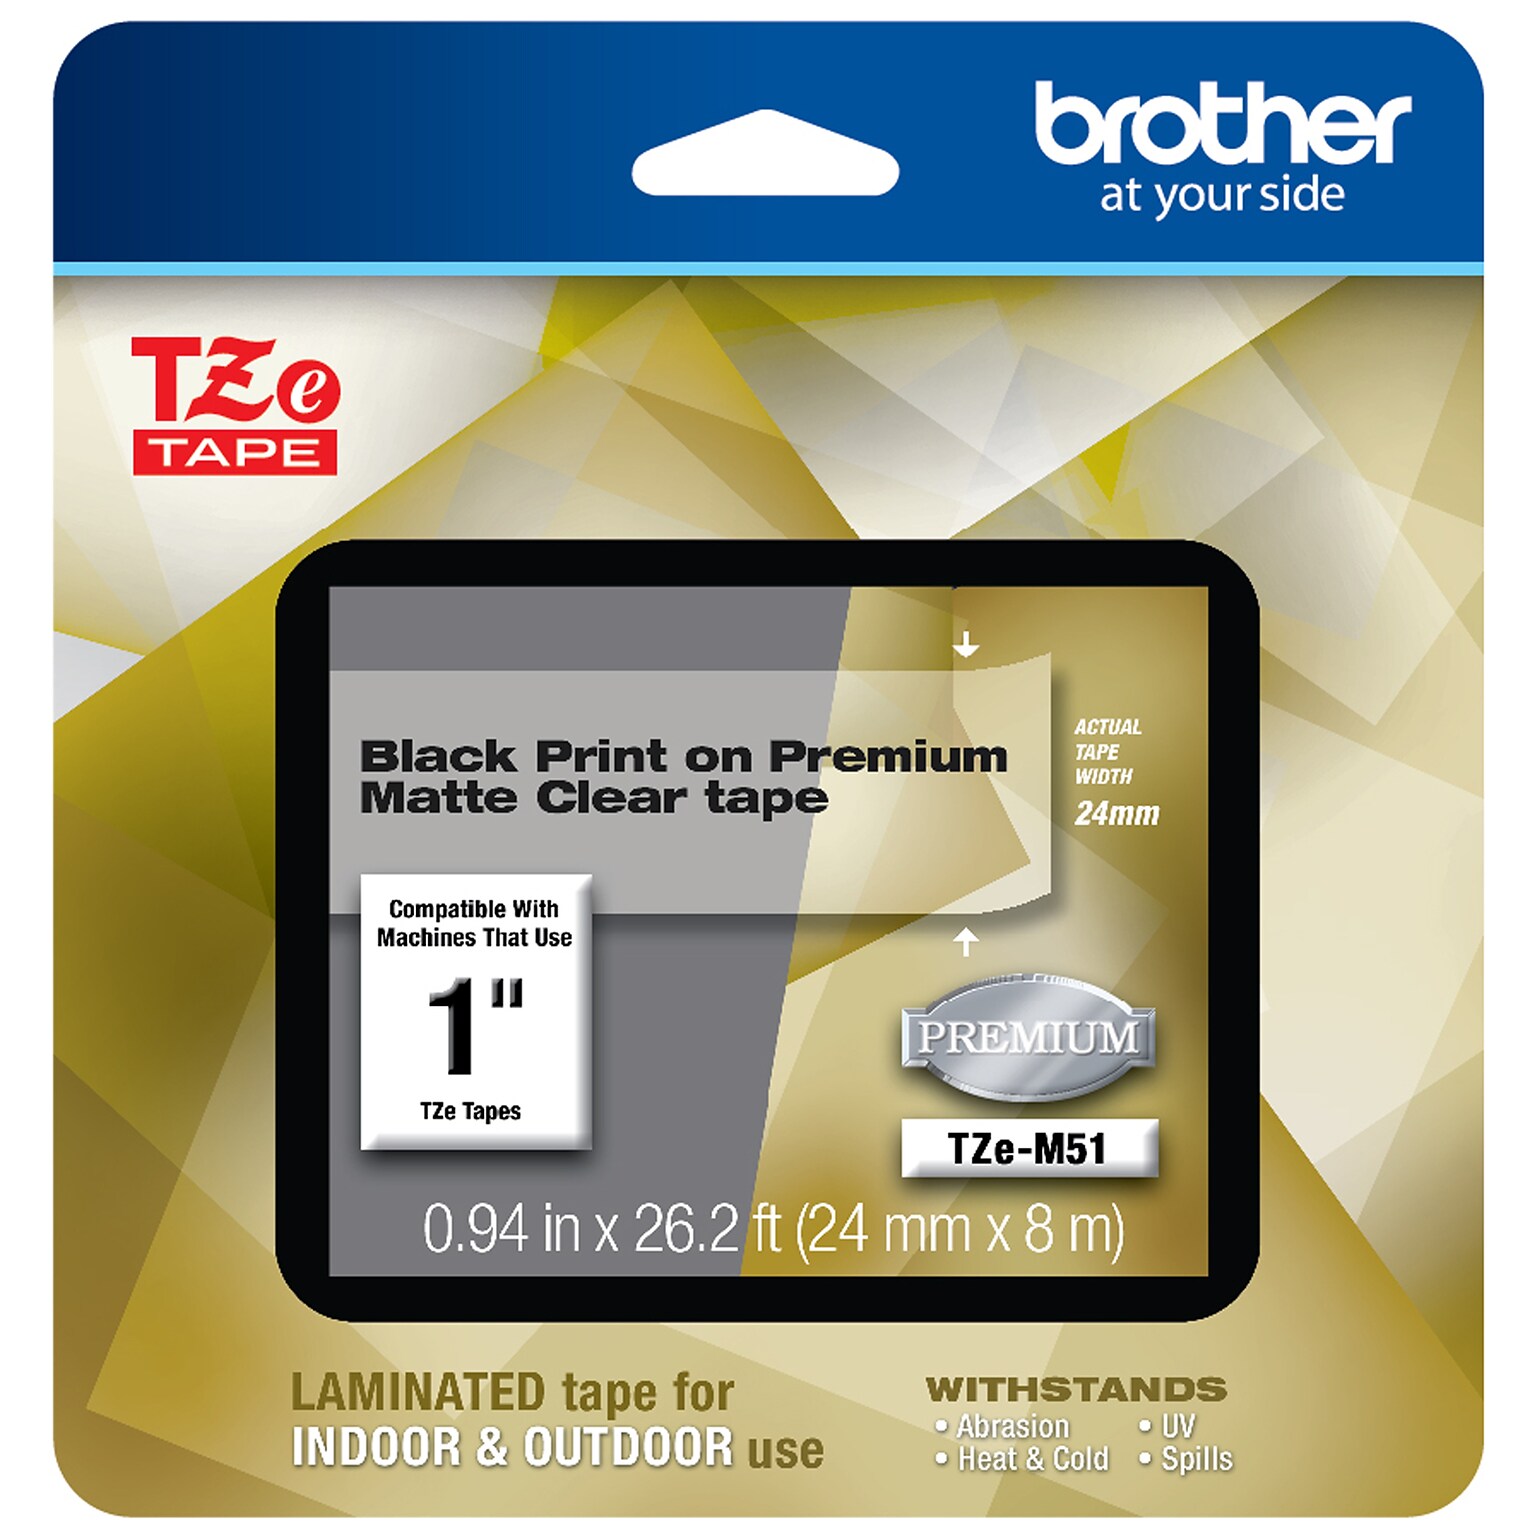 Brother P-touch TZe-M51 Laminated Premium Label Maker Tape, 1 x 26-2/10, Black on Matte Clear (TZe-M51)